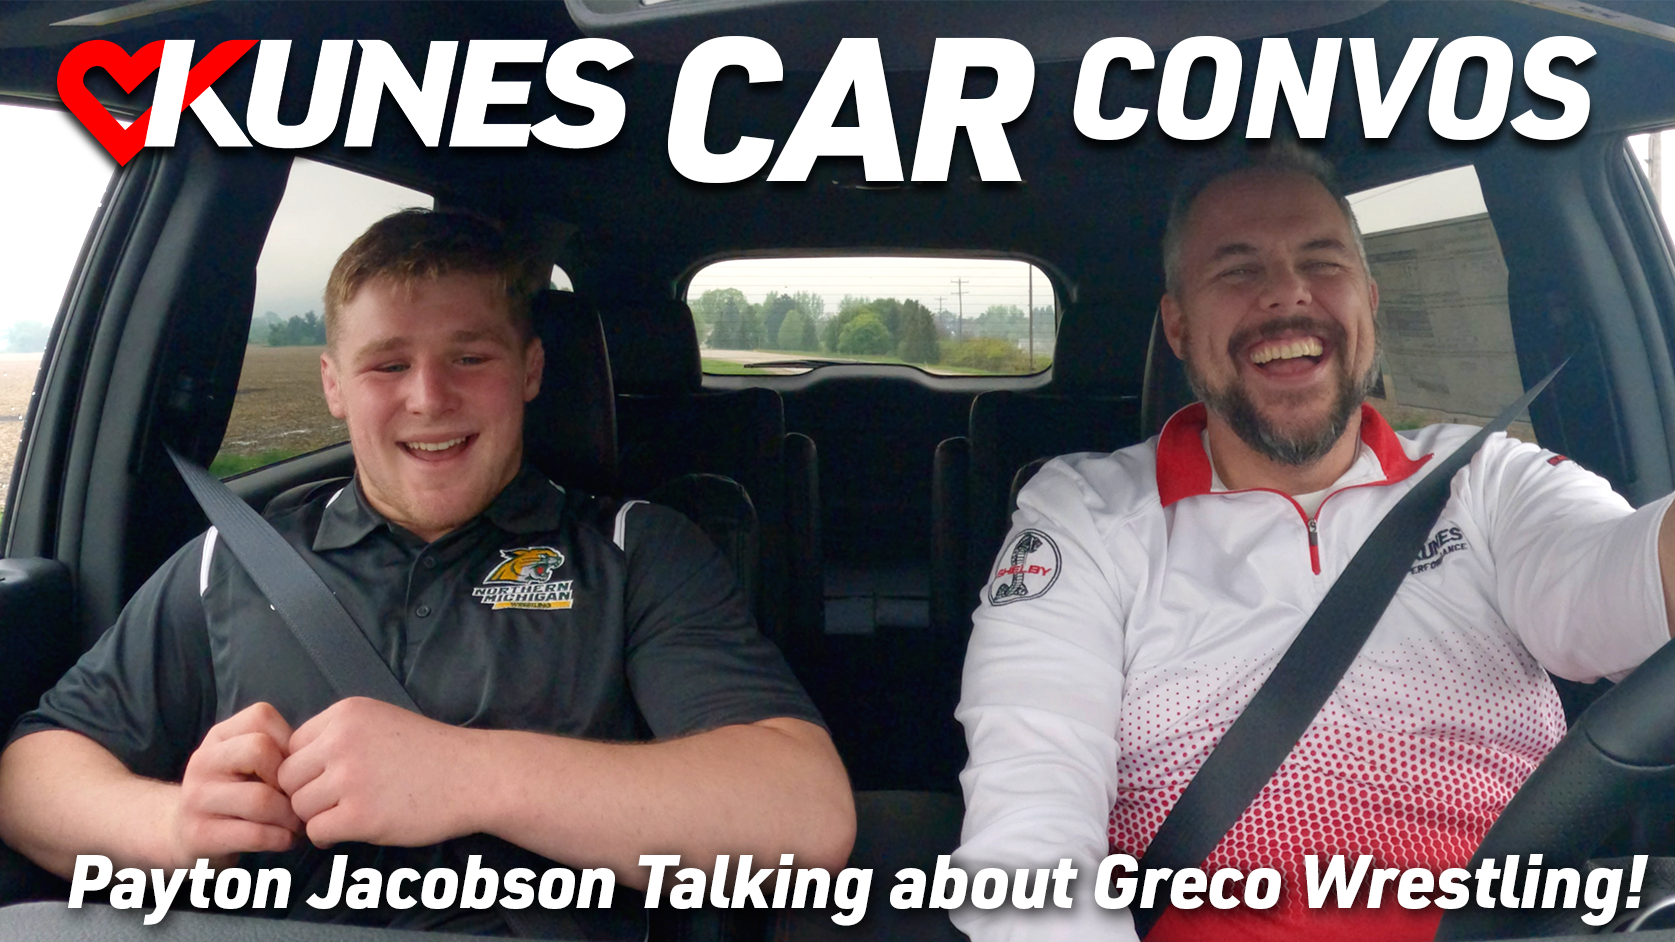 Pictured left to right: Payton Jacobson, Team USA Greco-Roman Olympic Wrestler, and Scott Kunes, COO of Kunes Auto & RV Group, laughing as they drive around in a 2024 Dodge Durango RT
Text graphic reads: Kunes Car Convos; Payton Jacobson Talking about Greco Wrestling!